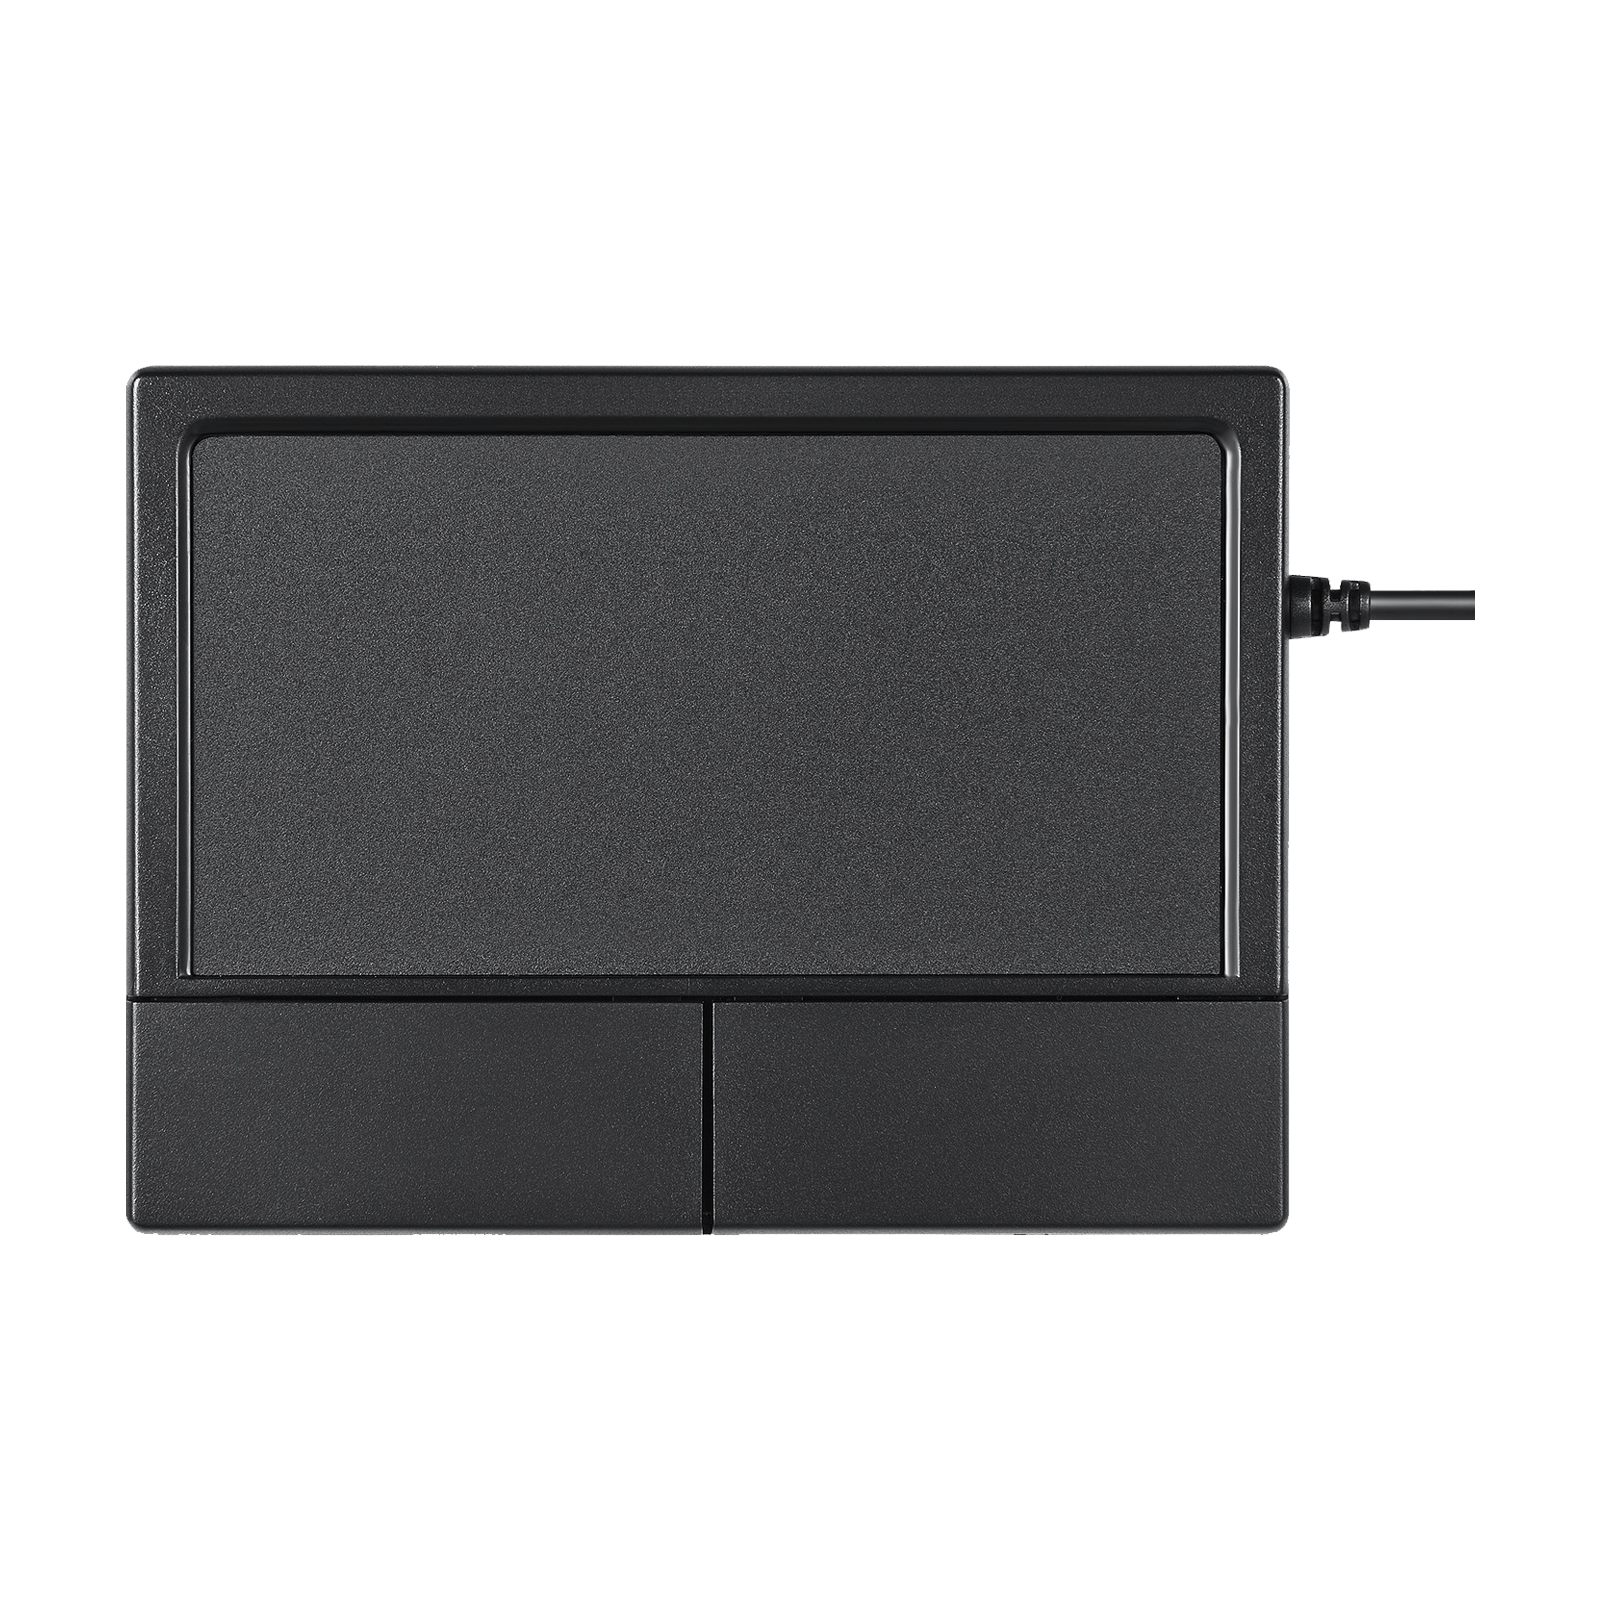 PERIPAD-504 - Wired Touchpad (Larger Surface) - Perixx Europe